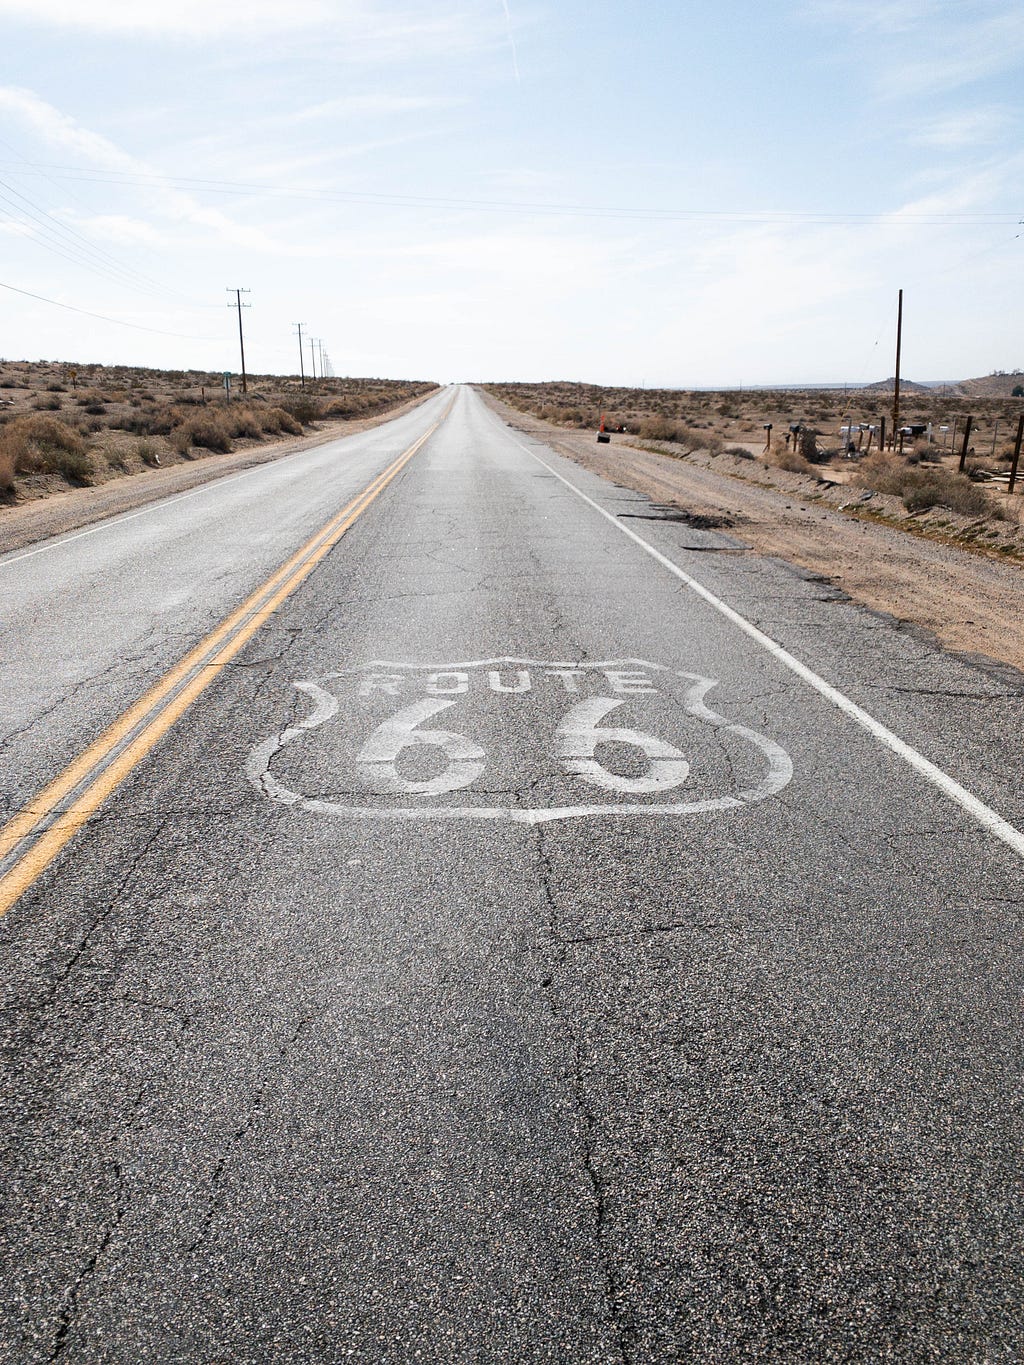 empty 2 lane road in the desert. Big ‘Route 66’ logo printed on the right lane of the road